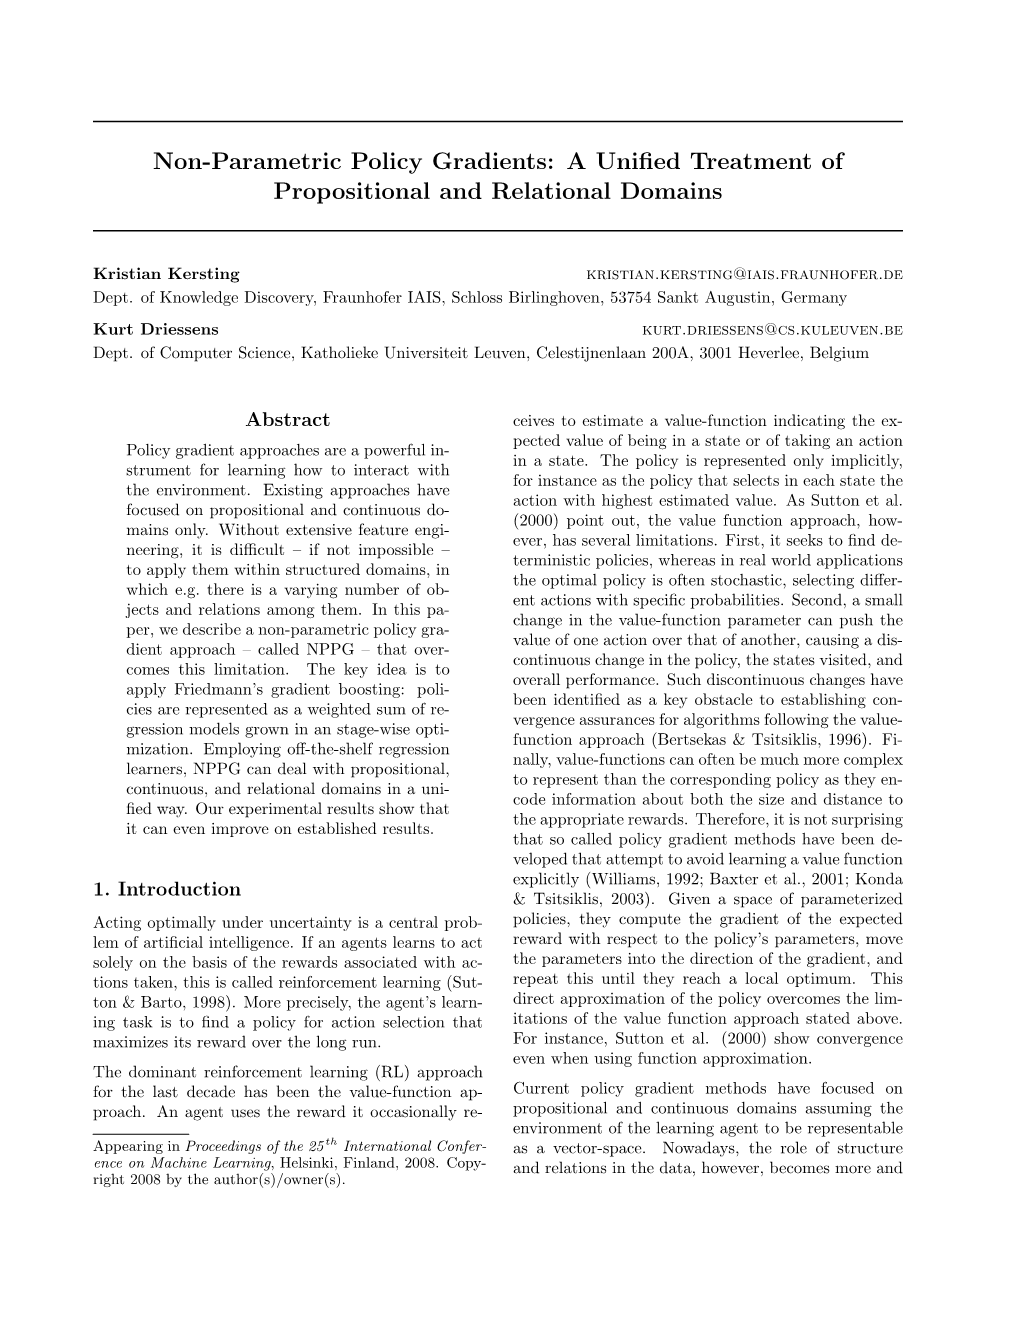 Non-Parametric Policy Gradients: a Uniﬁed Treatment of Propositional and Relational Domains